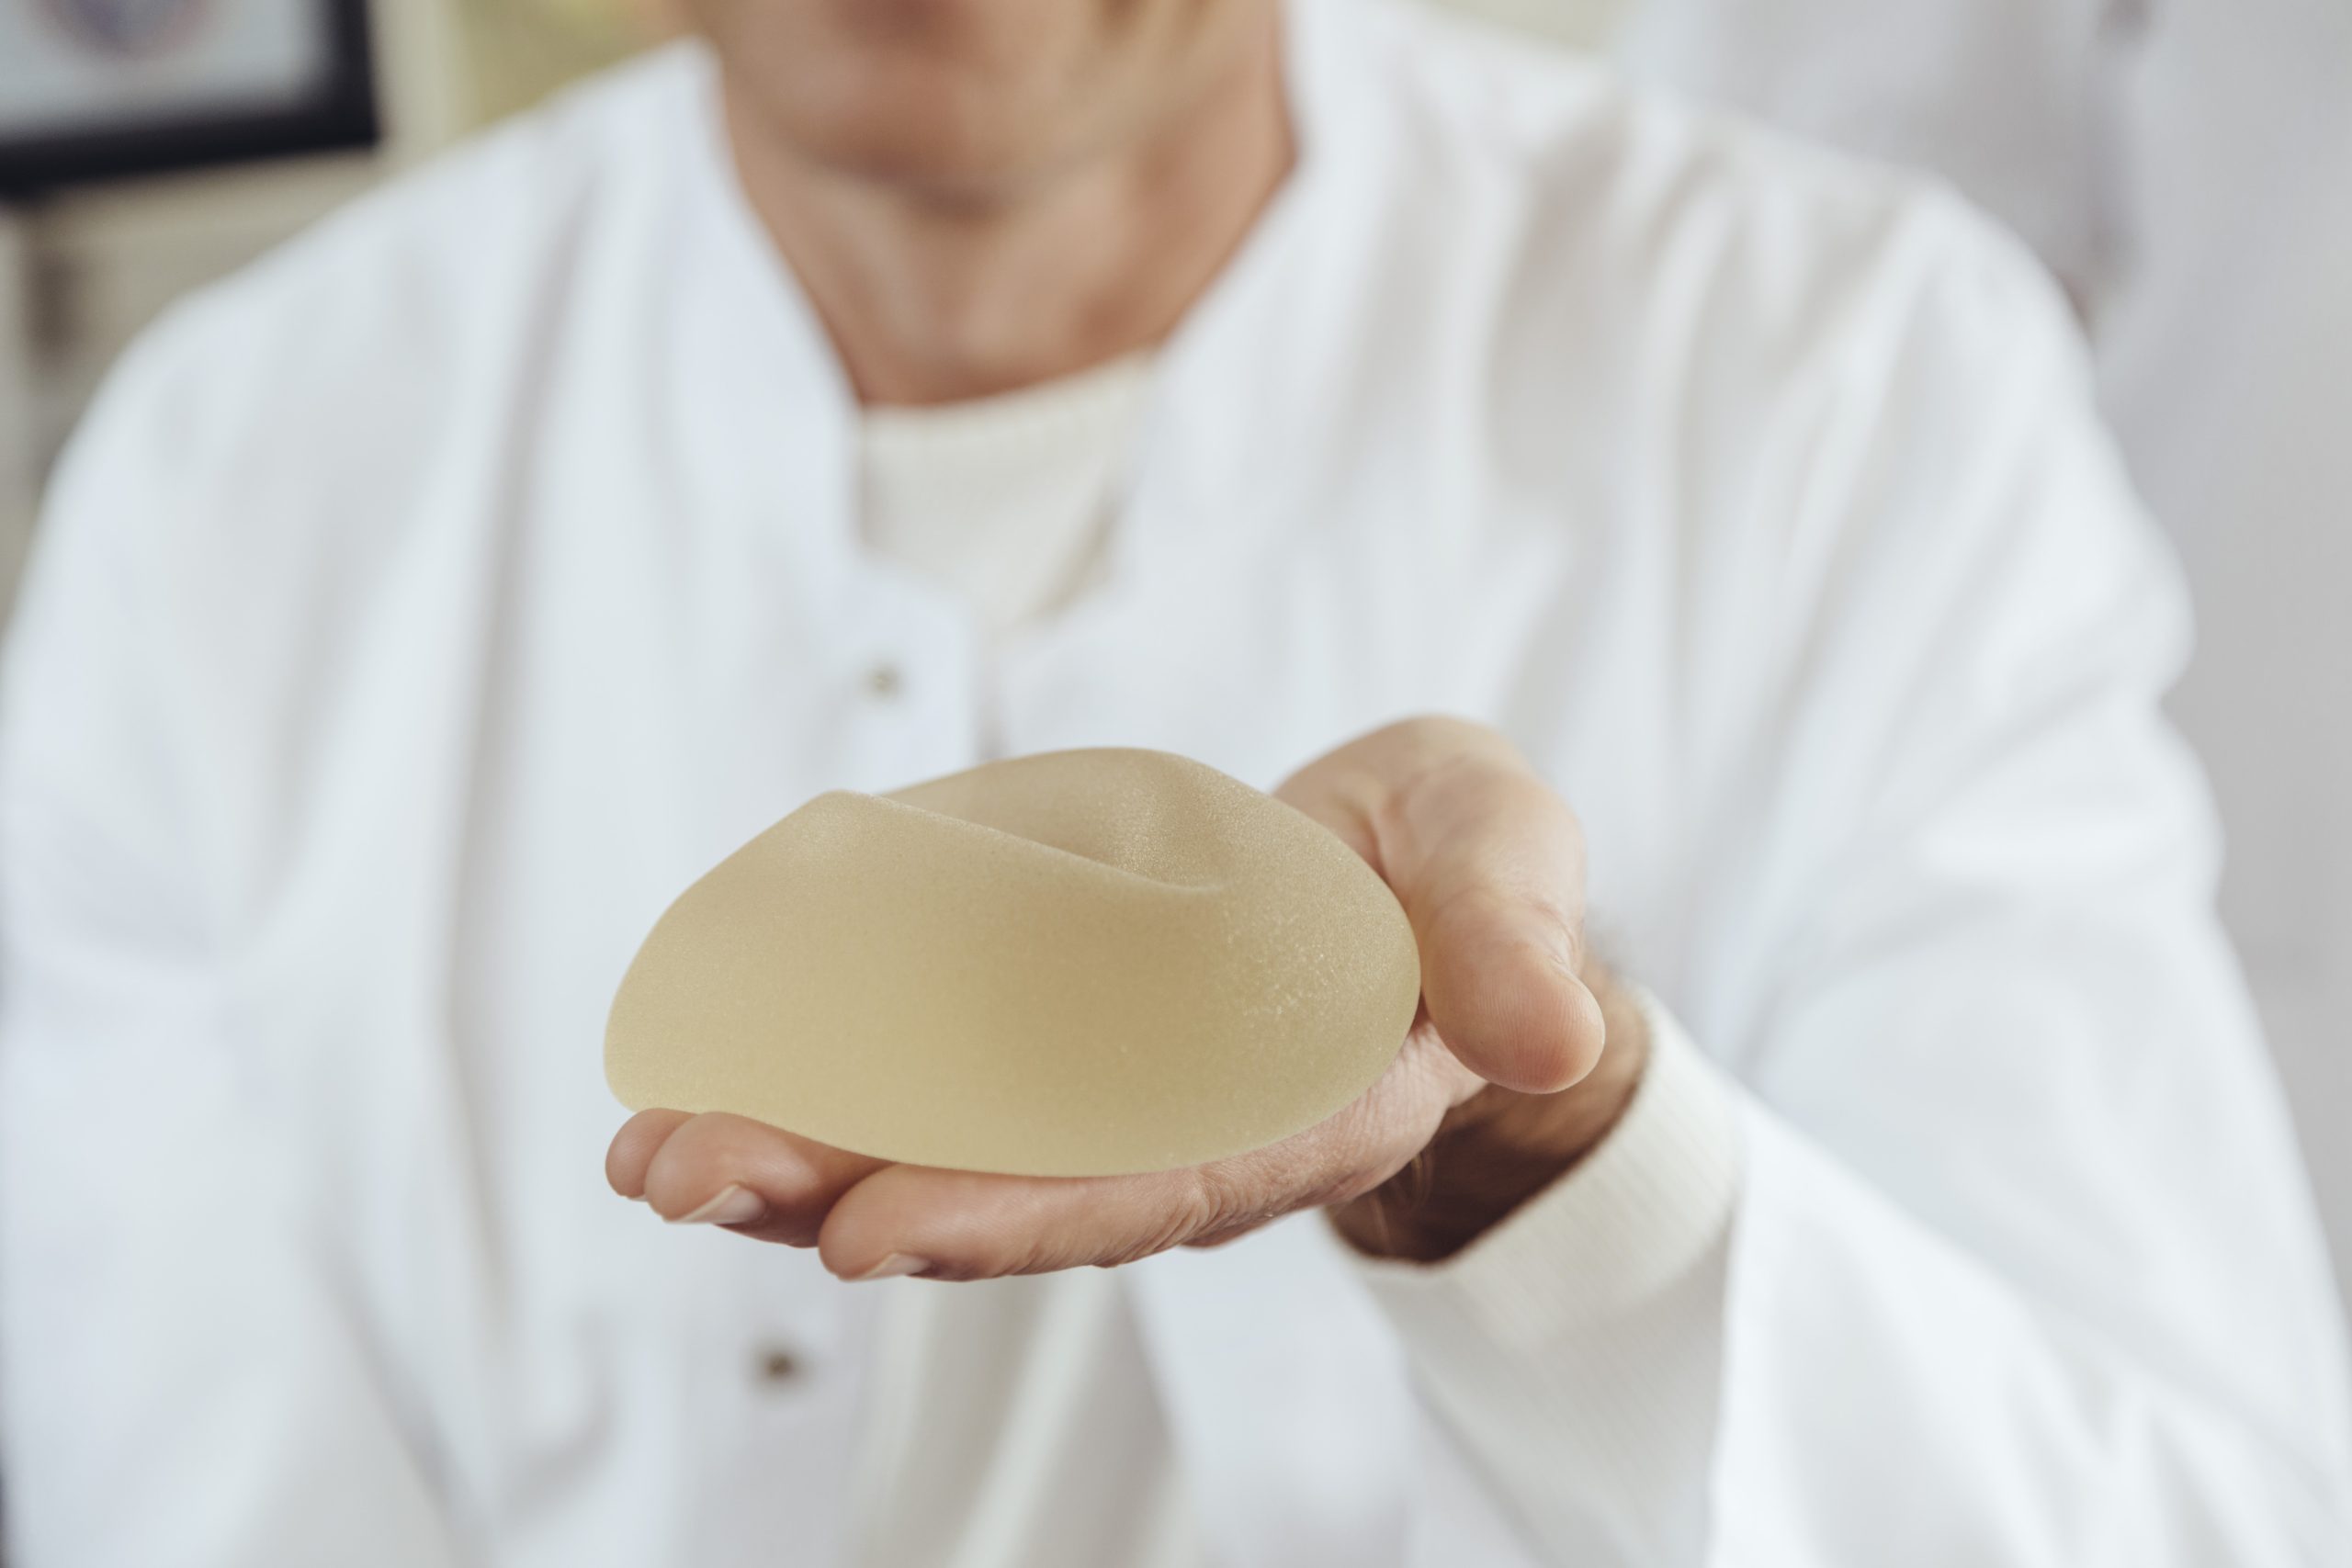 Doctor showing a silicone breast implant